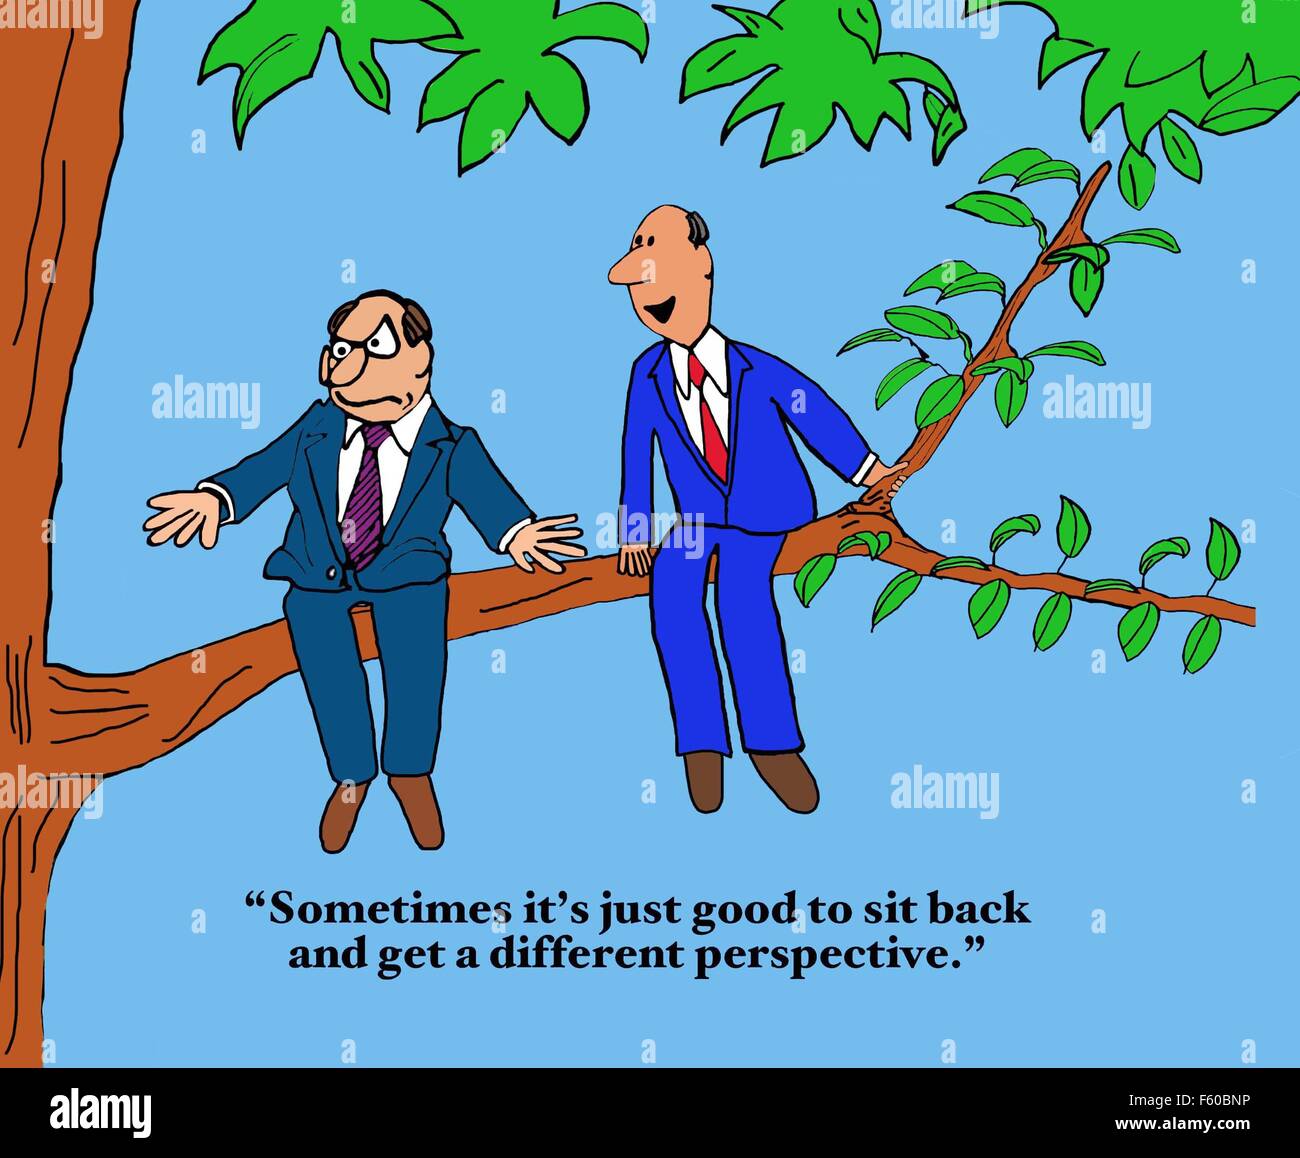 Business cartoon of two men on tree branch, 'Sometime it's just good ti sit back and get a different perspective'. Stock Photo